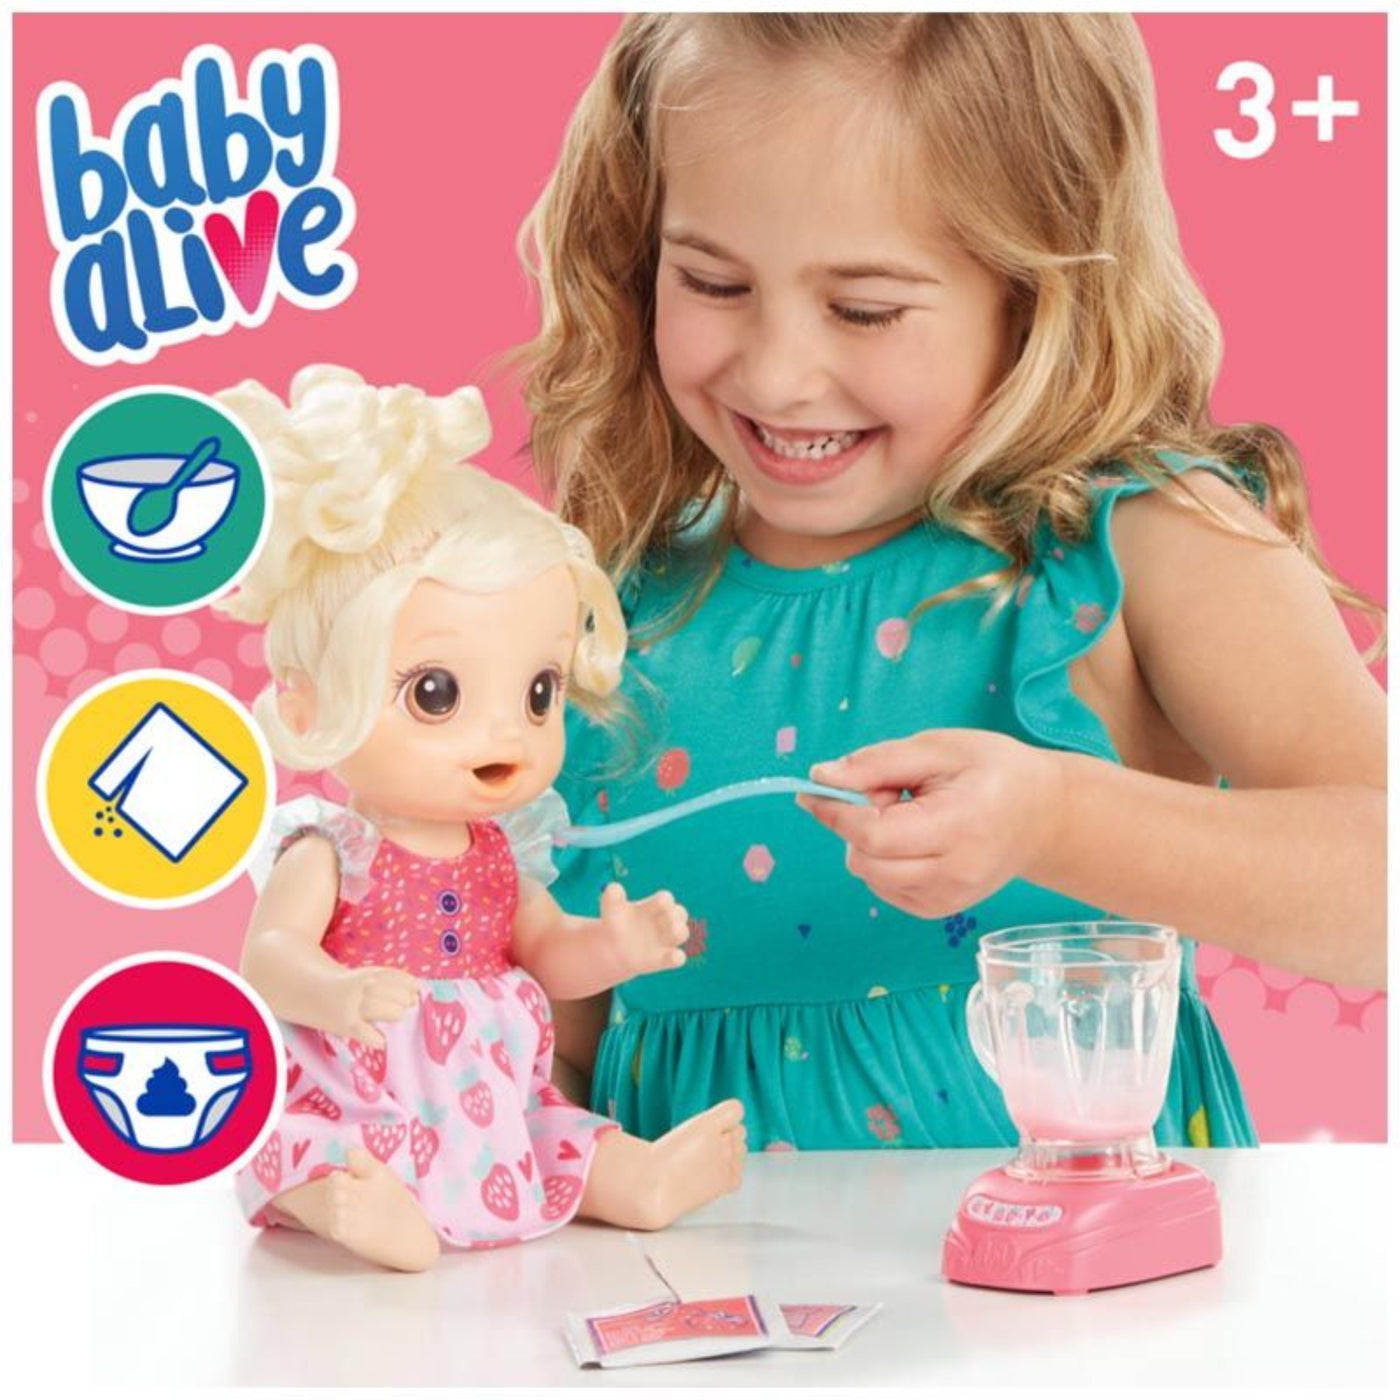 Baby Alive Magical Mixer Baby Doll image showing girl feeding doll with a spoon